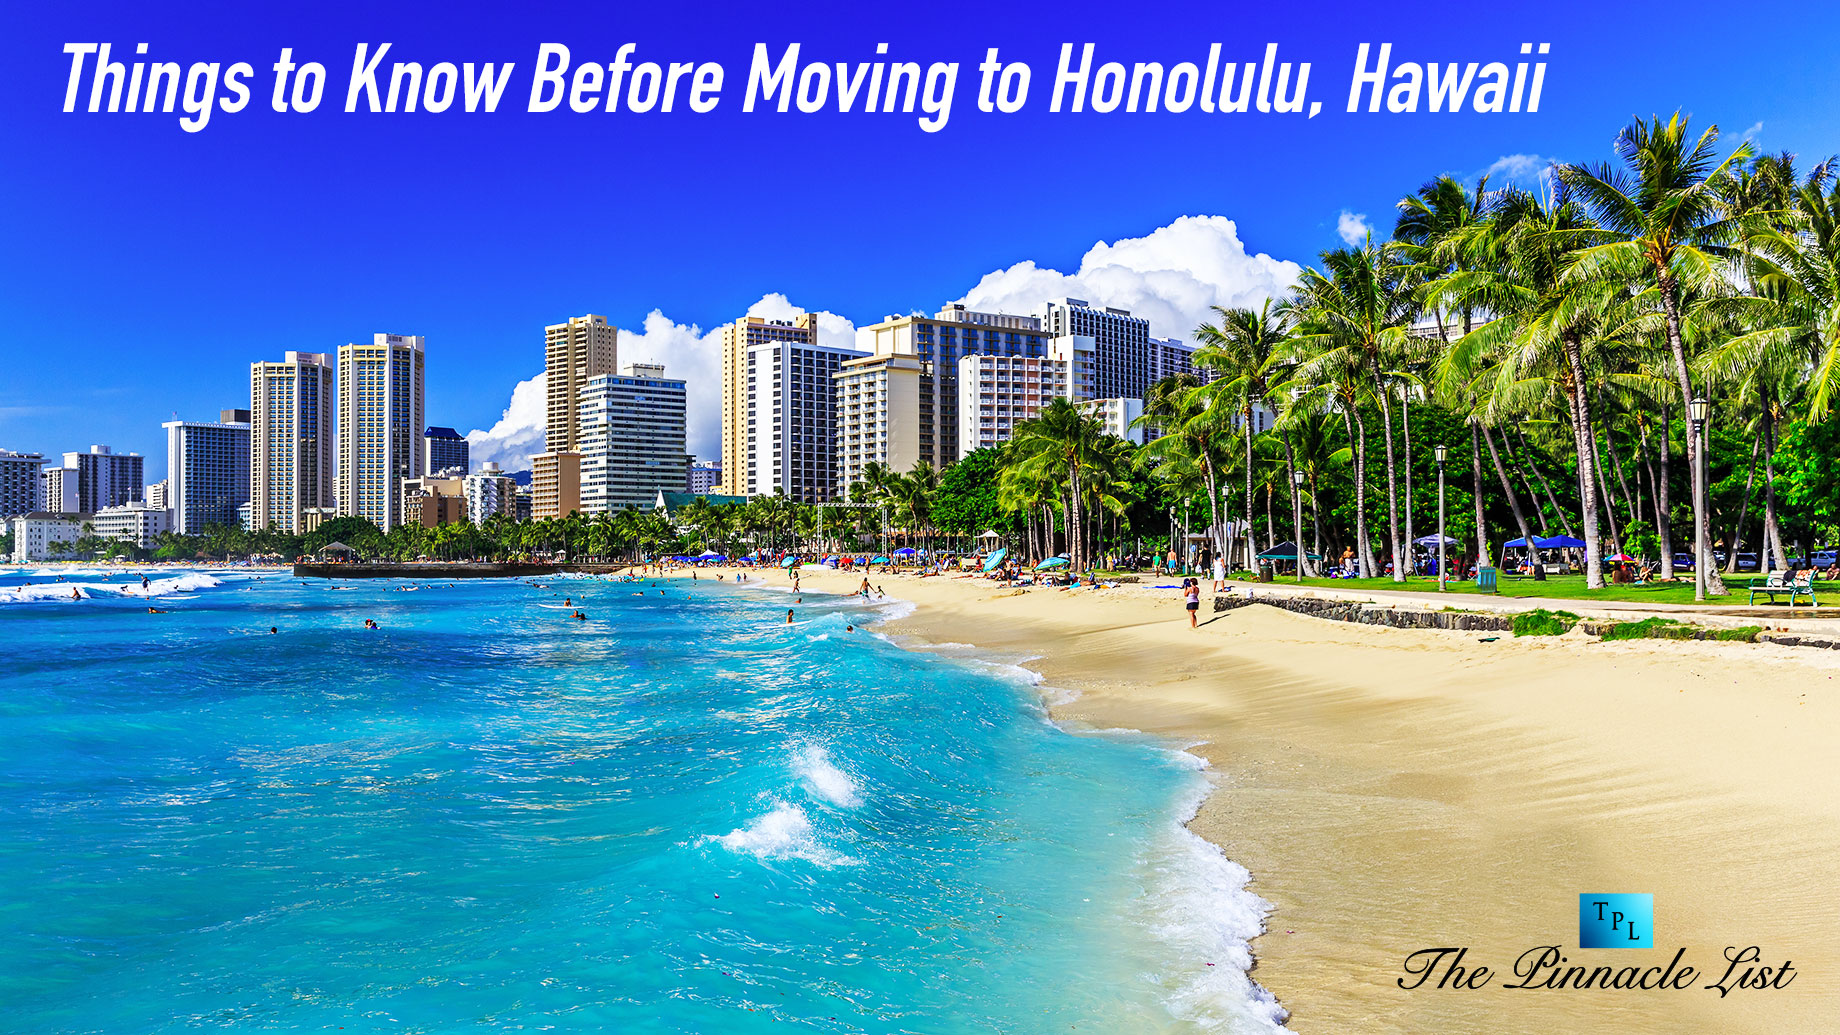 Things to Know Before Moving to Honolulu, Hawaii